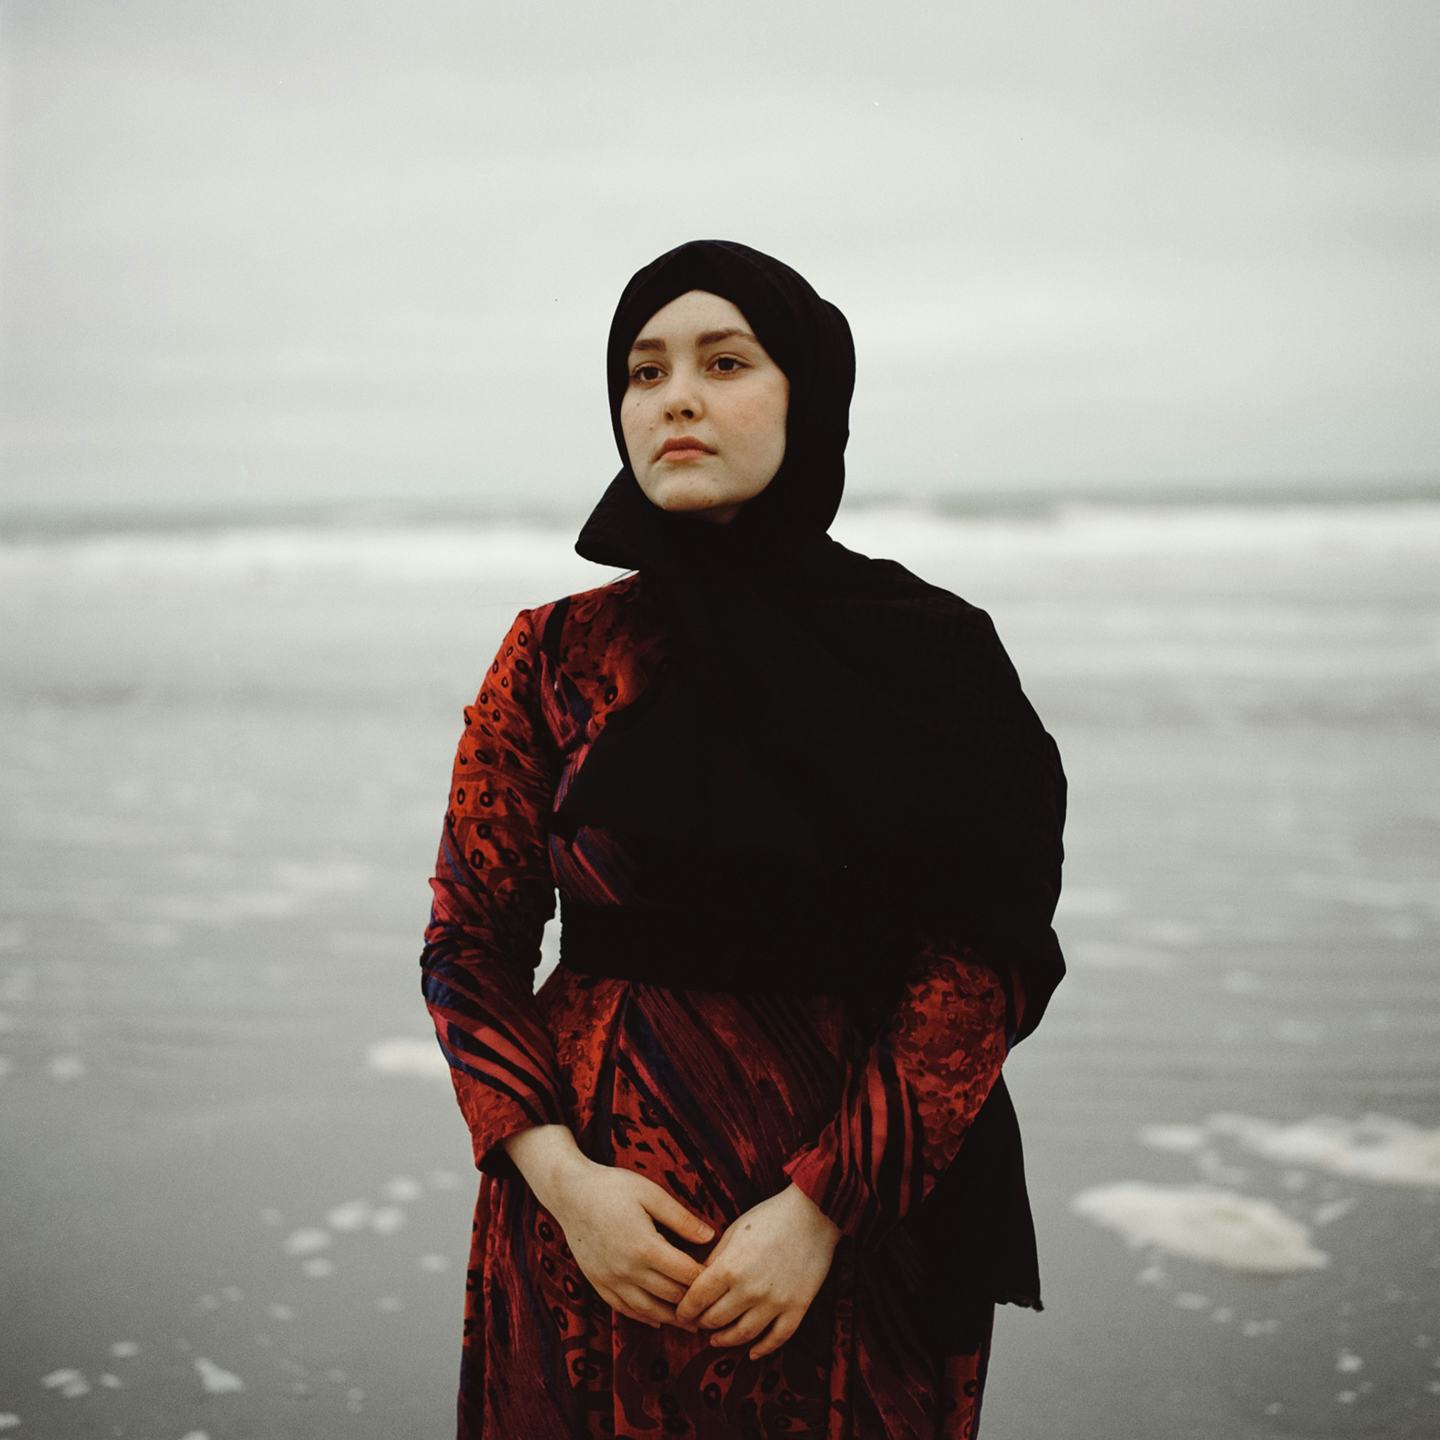 Women wearing a red dress and a black hijab overlooks a grey Dutch sea